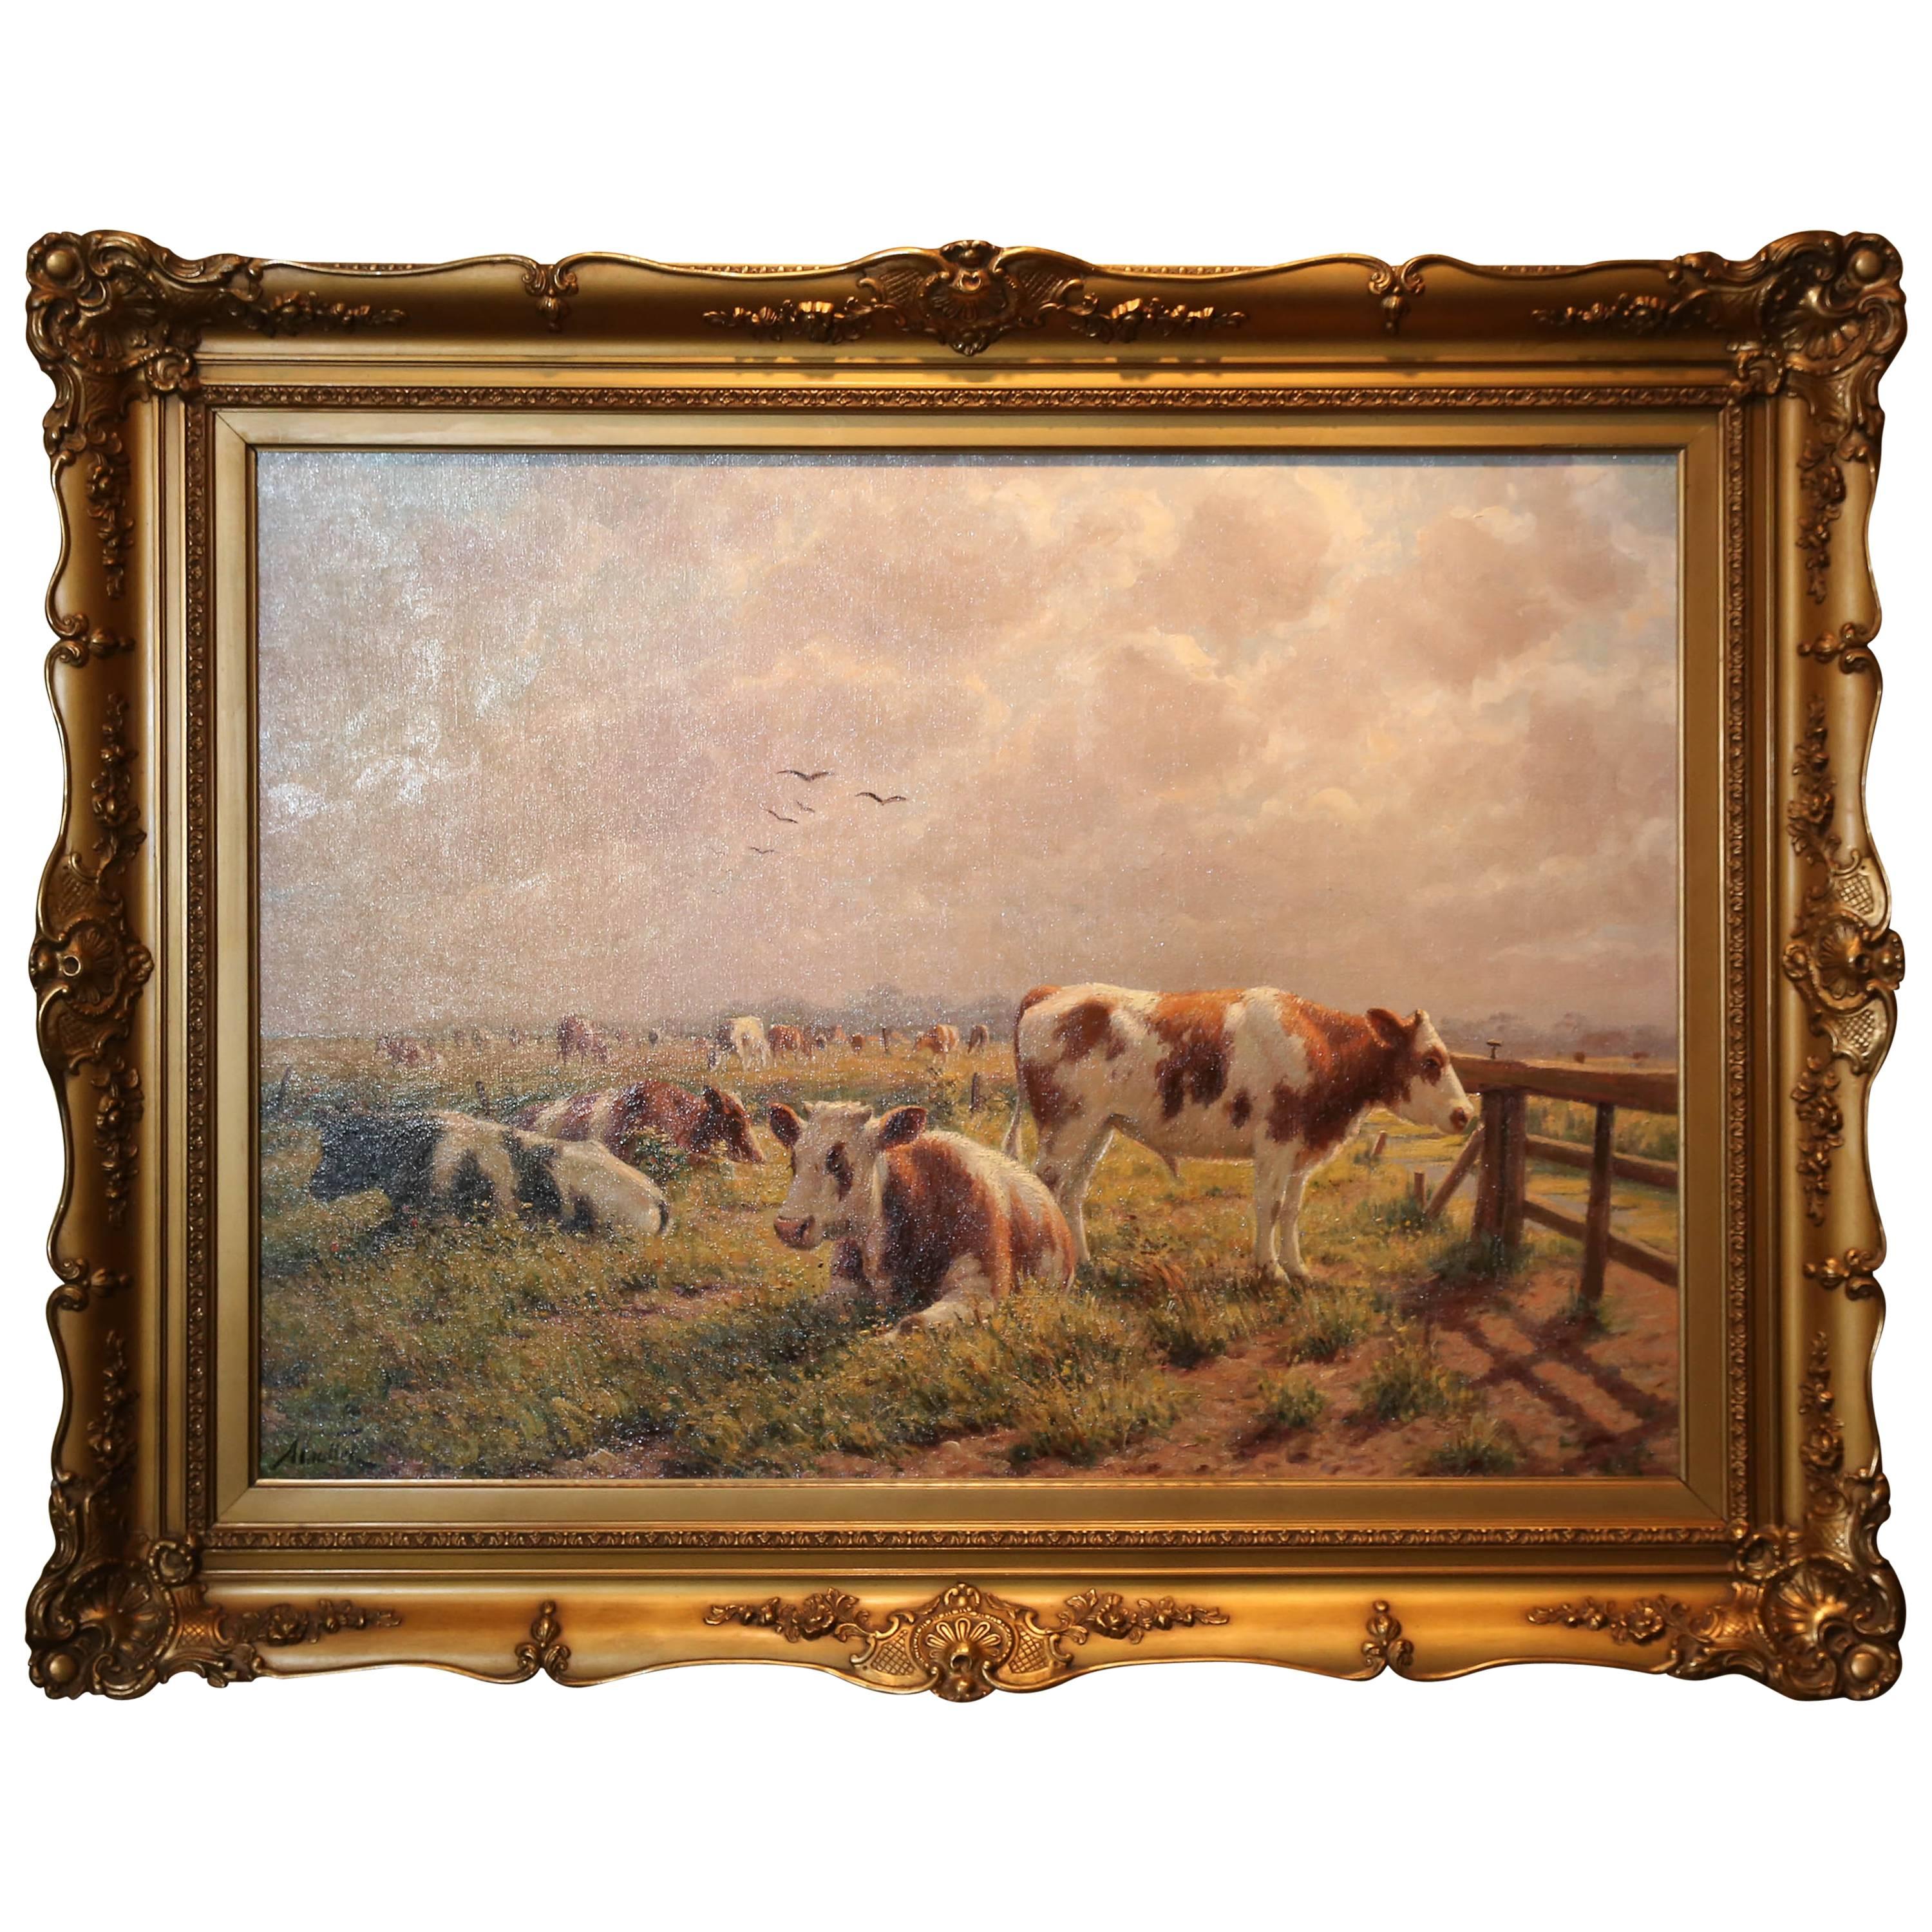 Oil on Canvas 'Cattle Grazing in a Pasture' by Albert Caullet Signed a Caullet For Sale